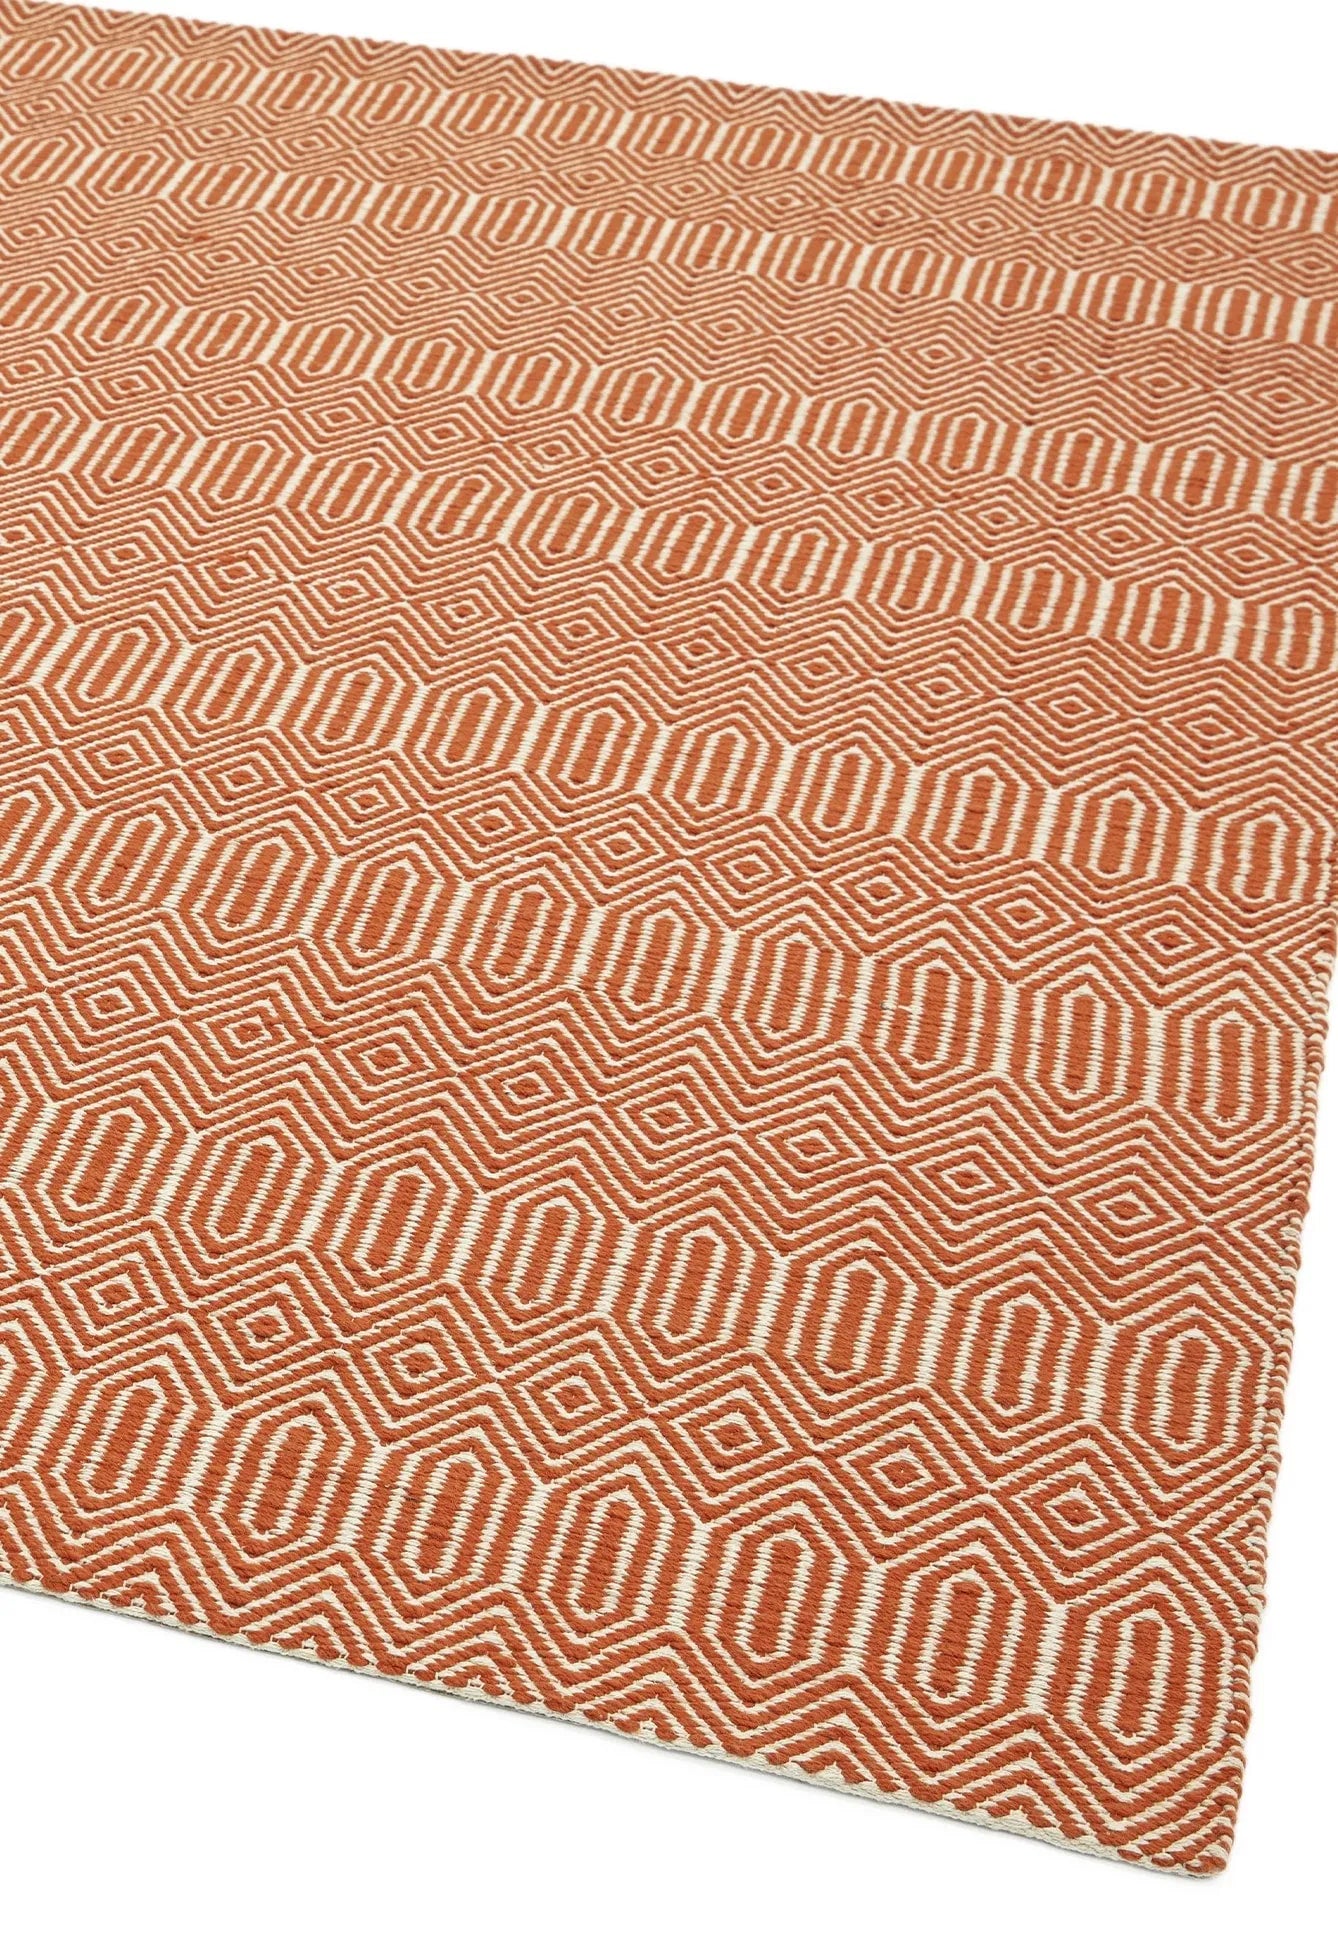 orange and white geometric runner with an aztec pattern